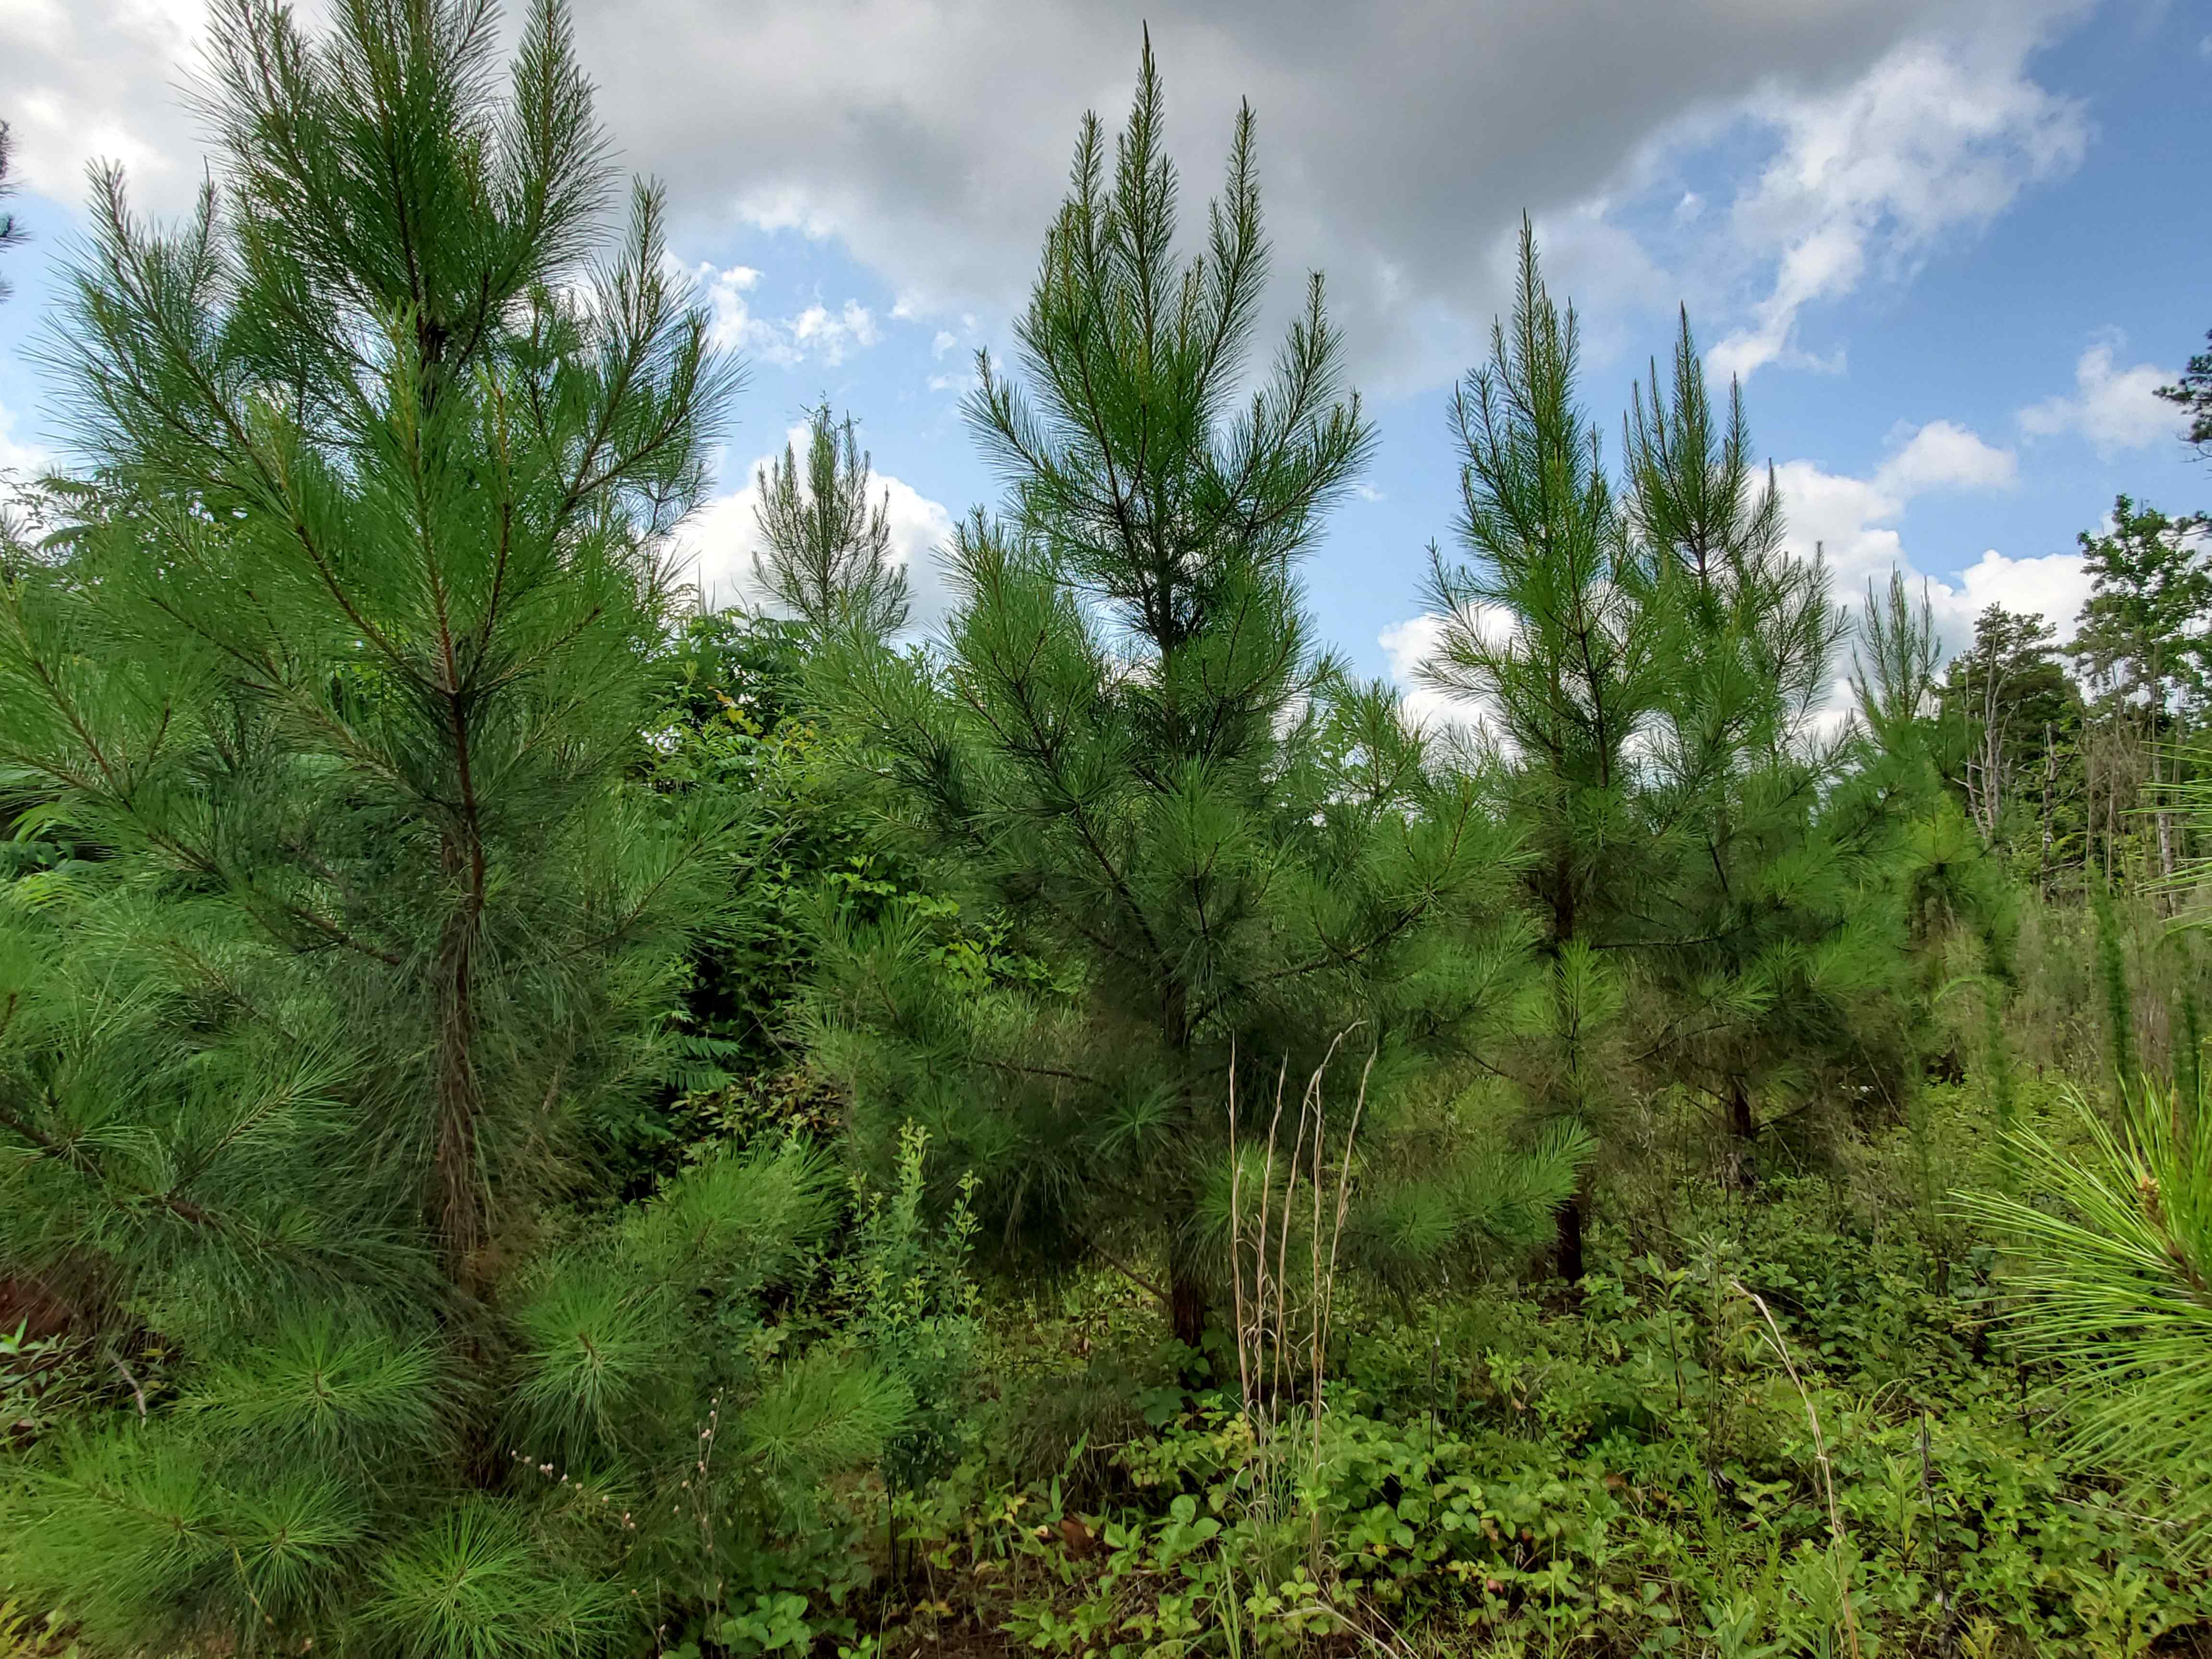 2019-20 planted loblolly pine